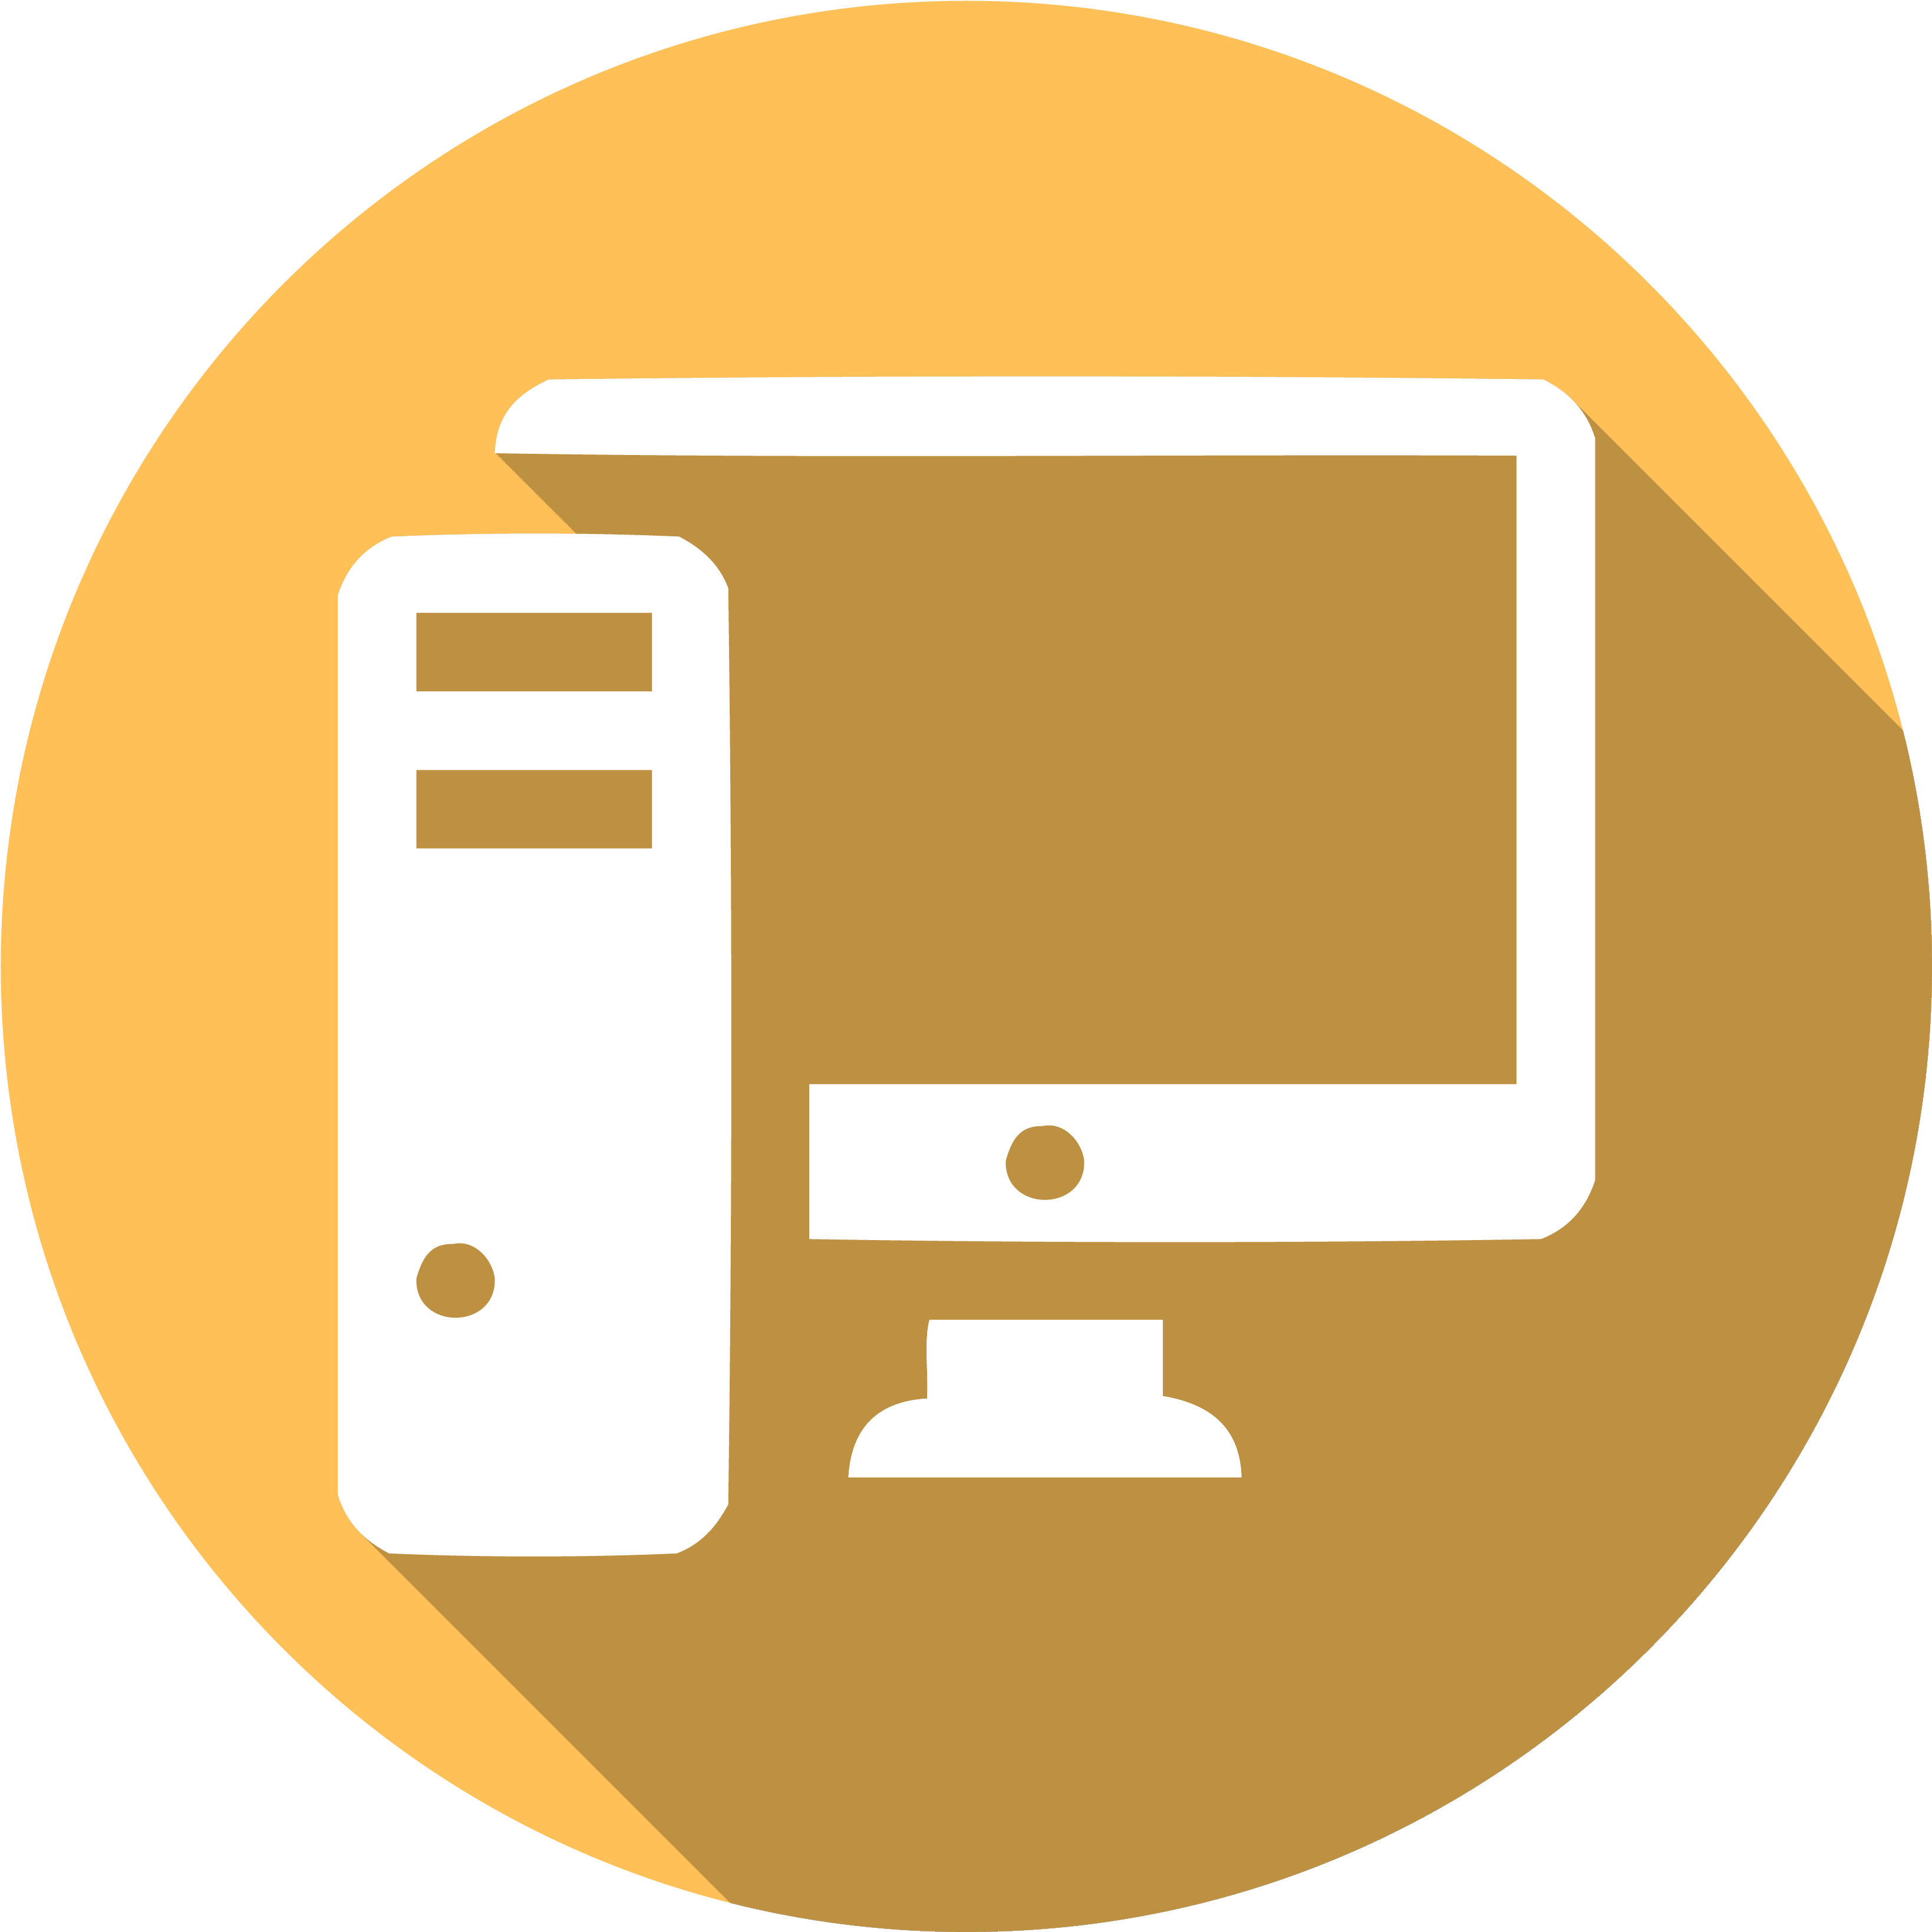 Icon Of A Desktop Computer - Computer Lab Icon Png (3333x3333)